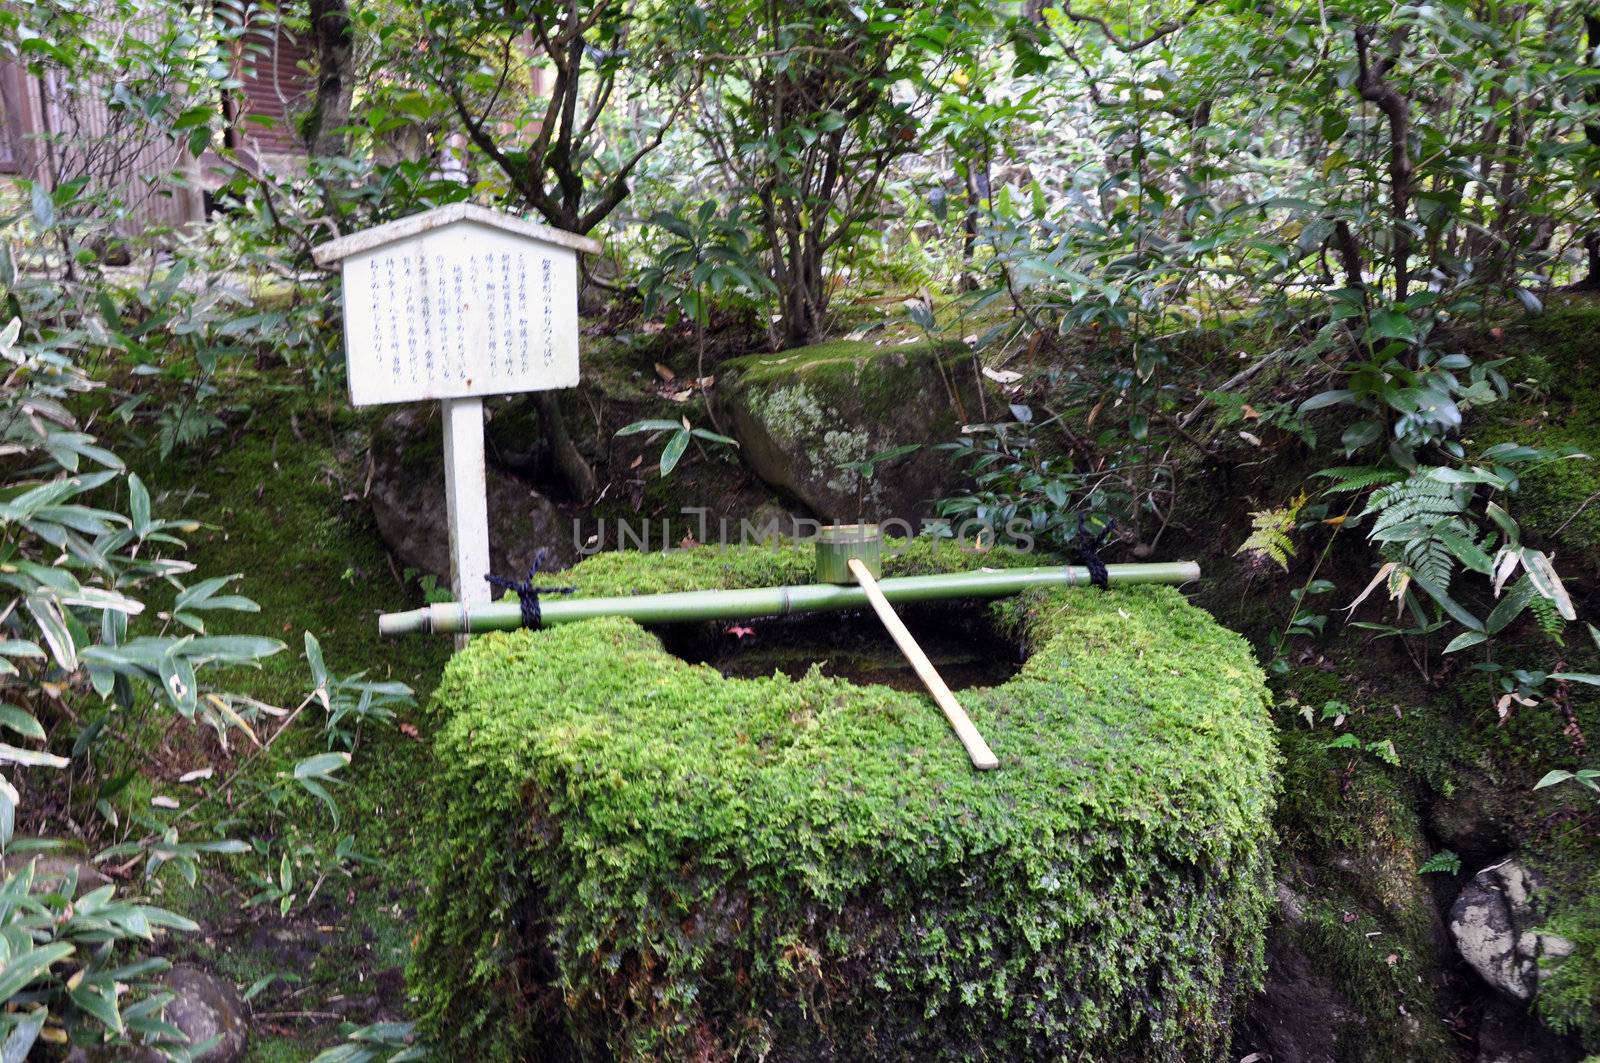 Traditional Bamboo Fountain in Kyoto, Japan